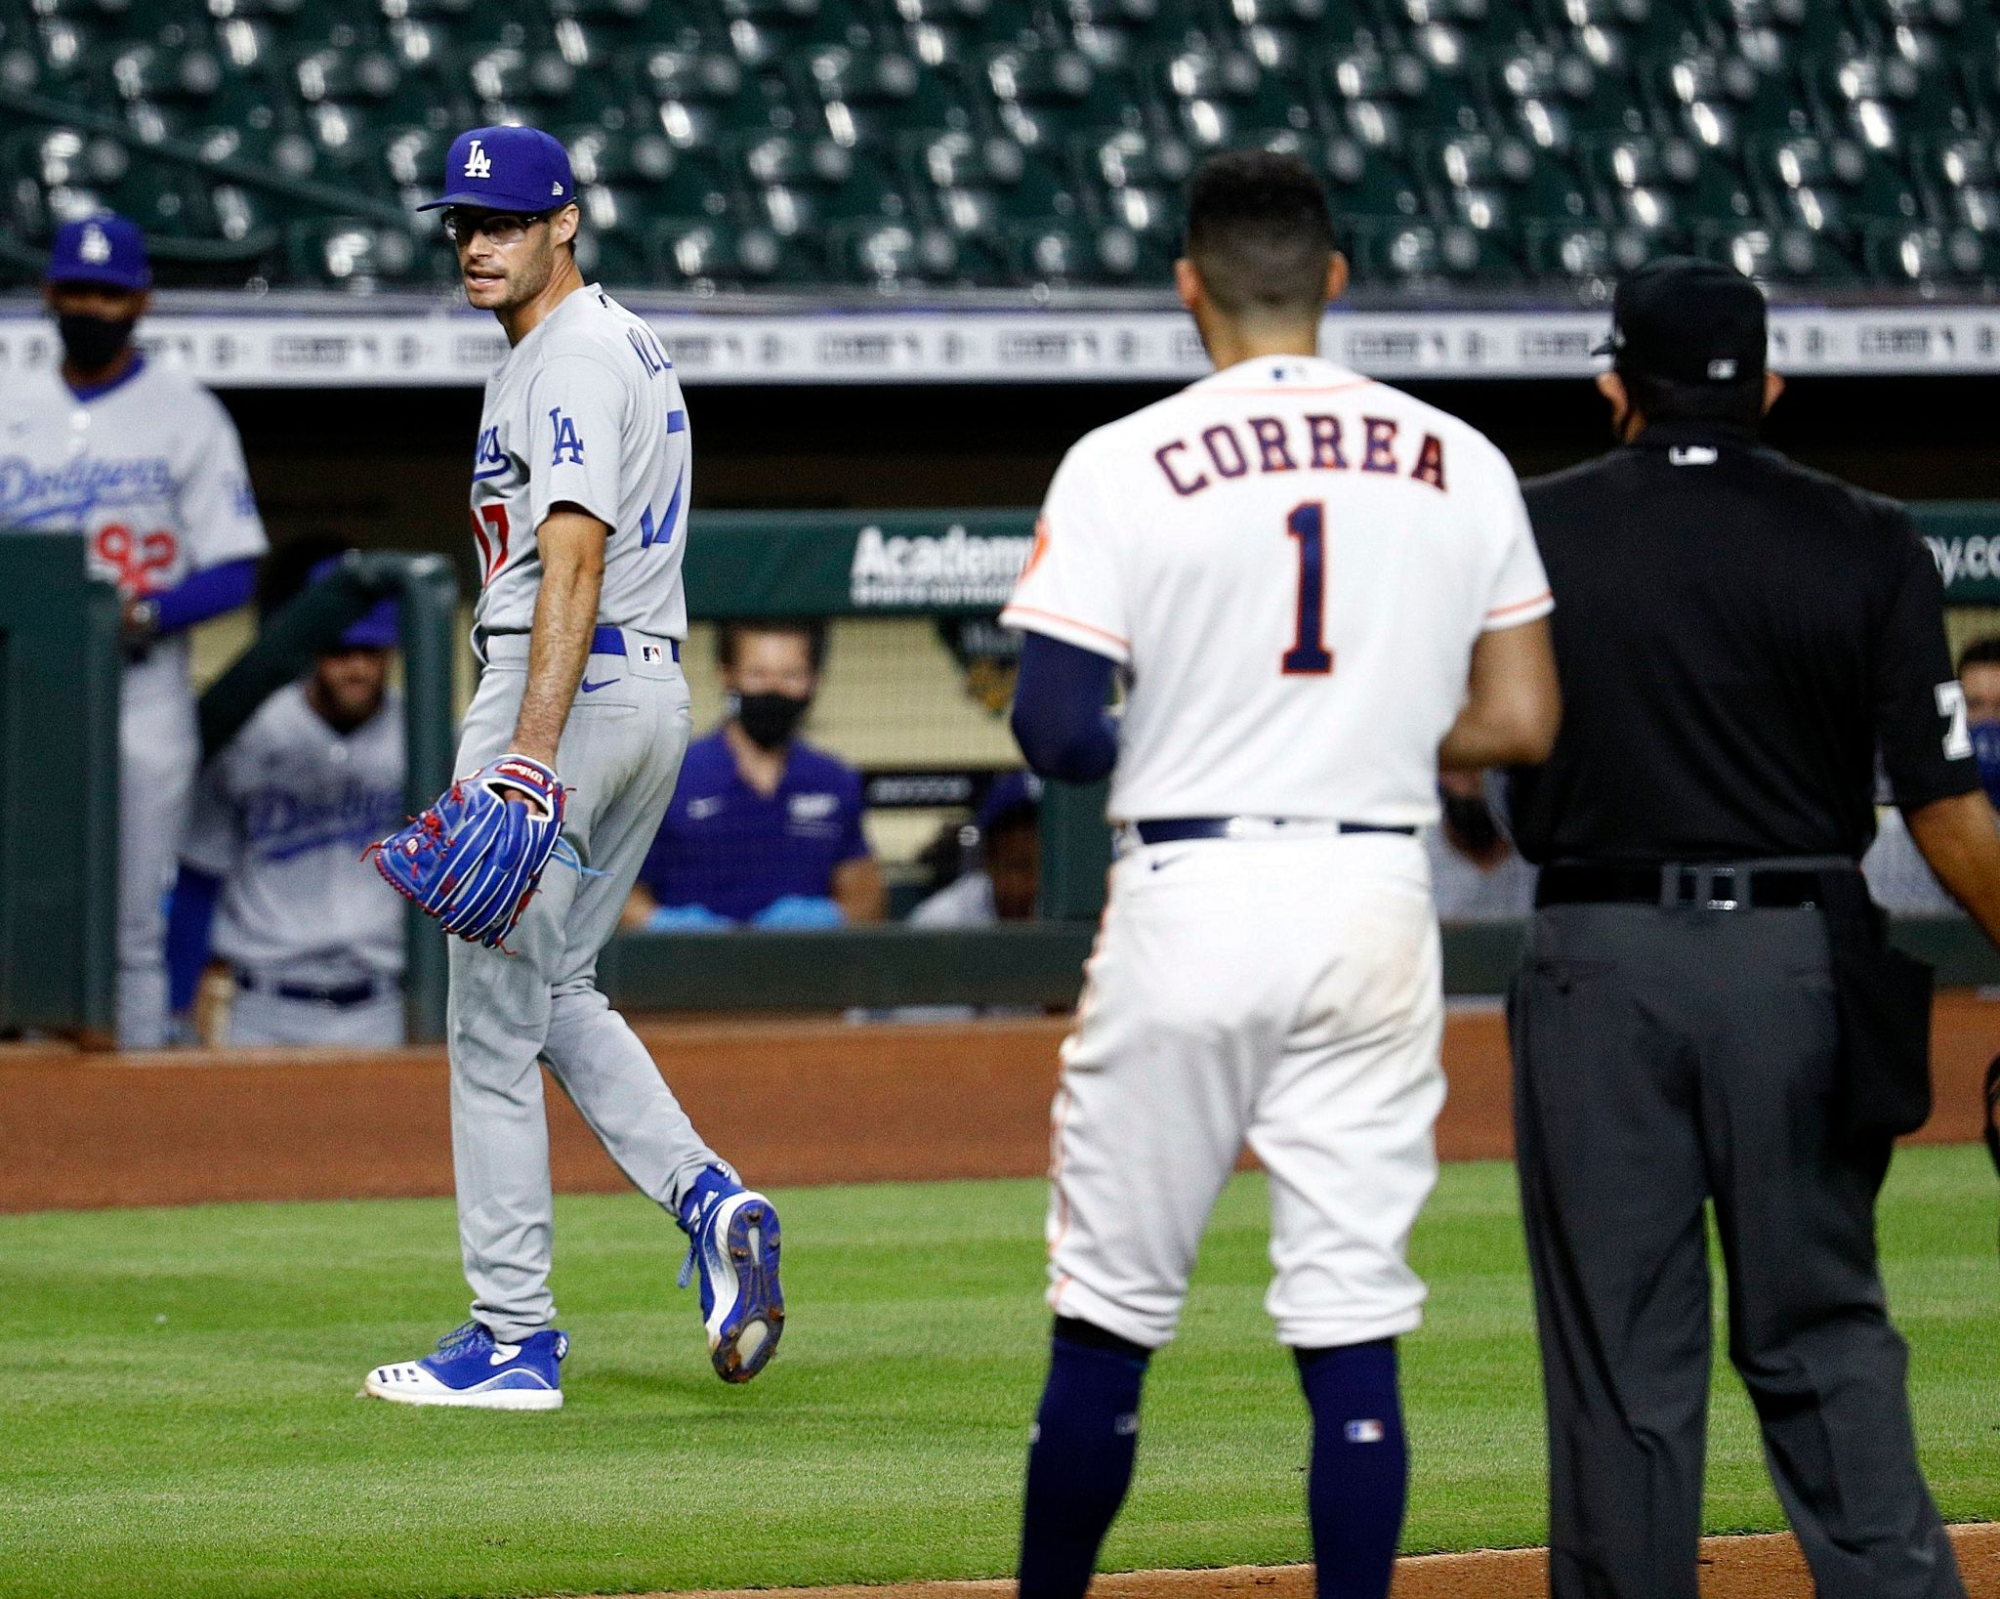 Dodgers' Joe Kelly has a word with Houston Astros' Carlos Correa as he walks off the mound.